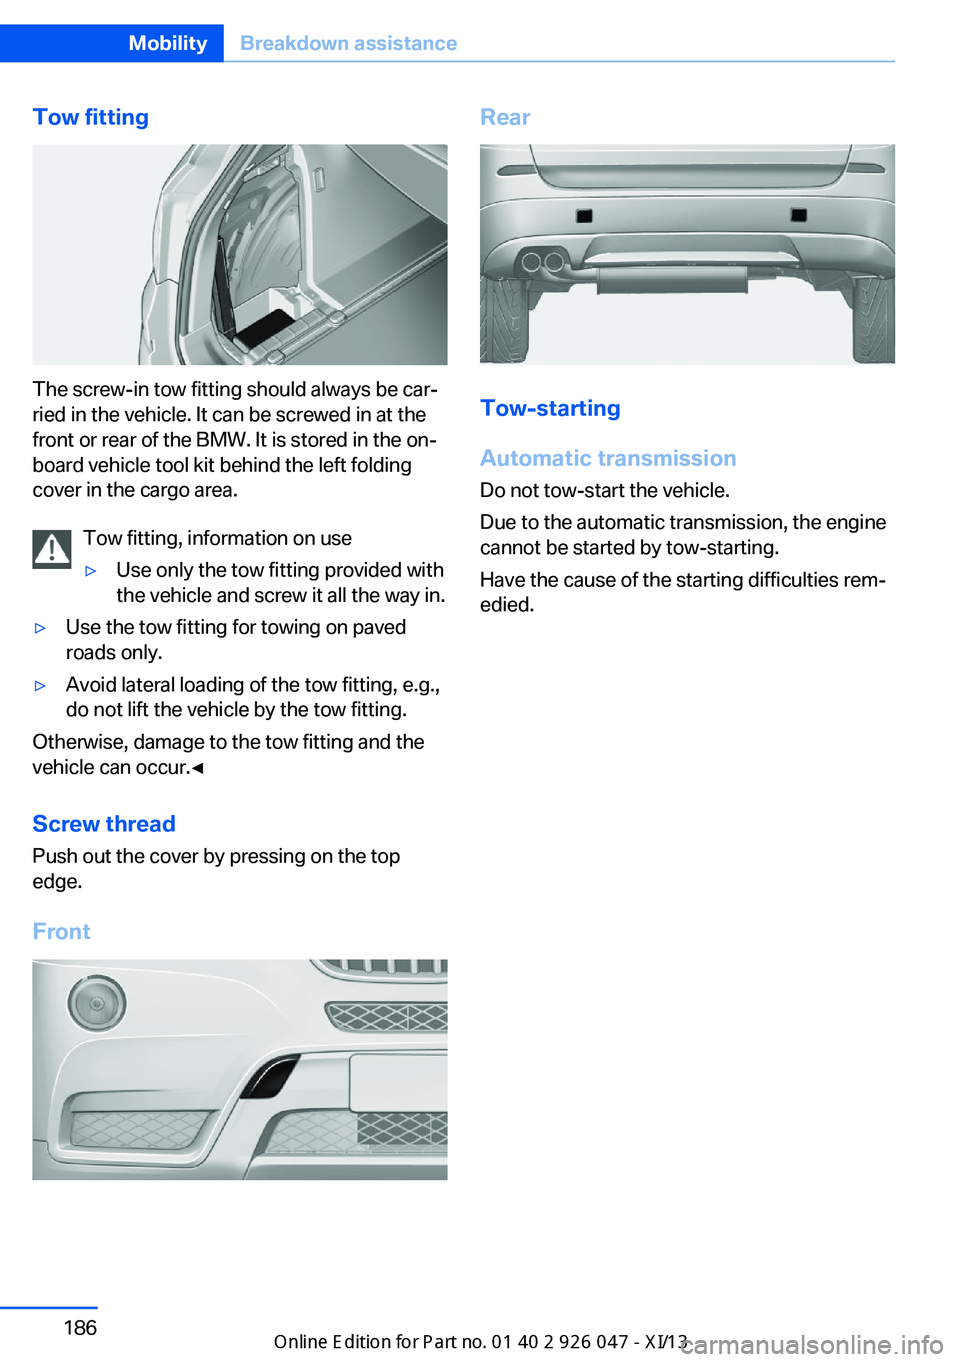 BMW X3 2013 F25 Owners Guide Tow fitting
The screw-in tow fitting should always be car‐
ried in the vehicle. It can be screwed in at the
front or rear of the BMW. It is stored in the on‐
board vehicle tool kit behind the left